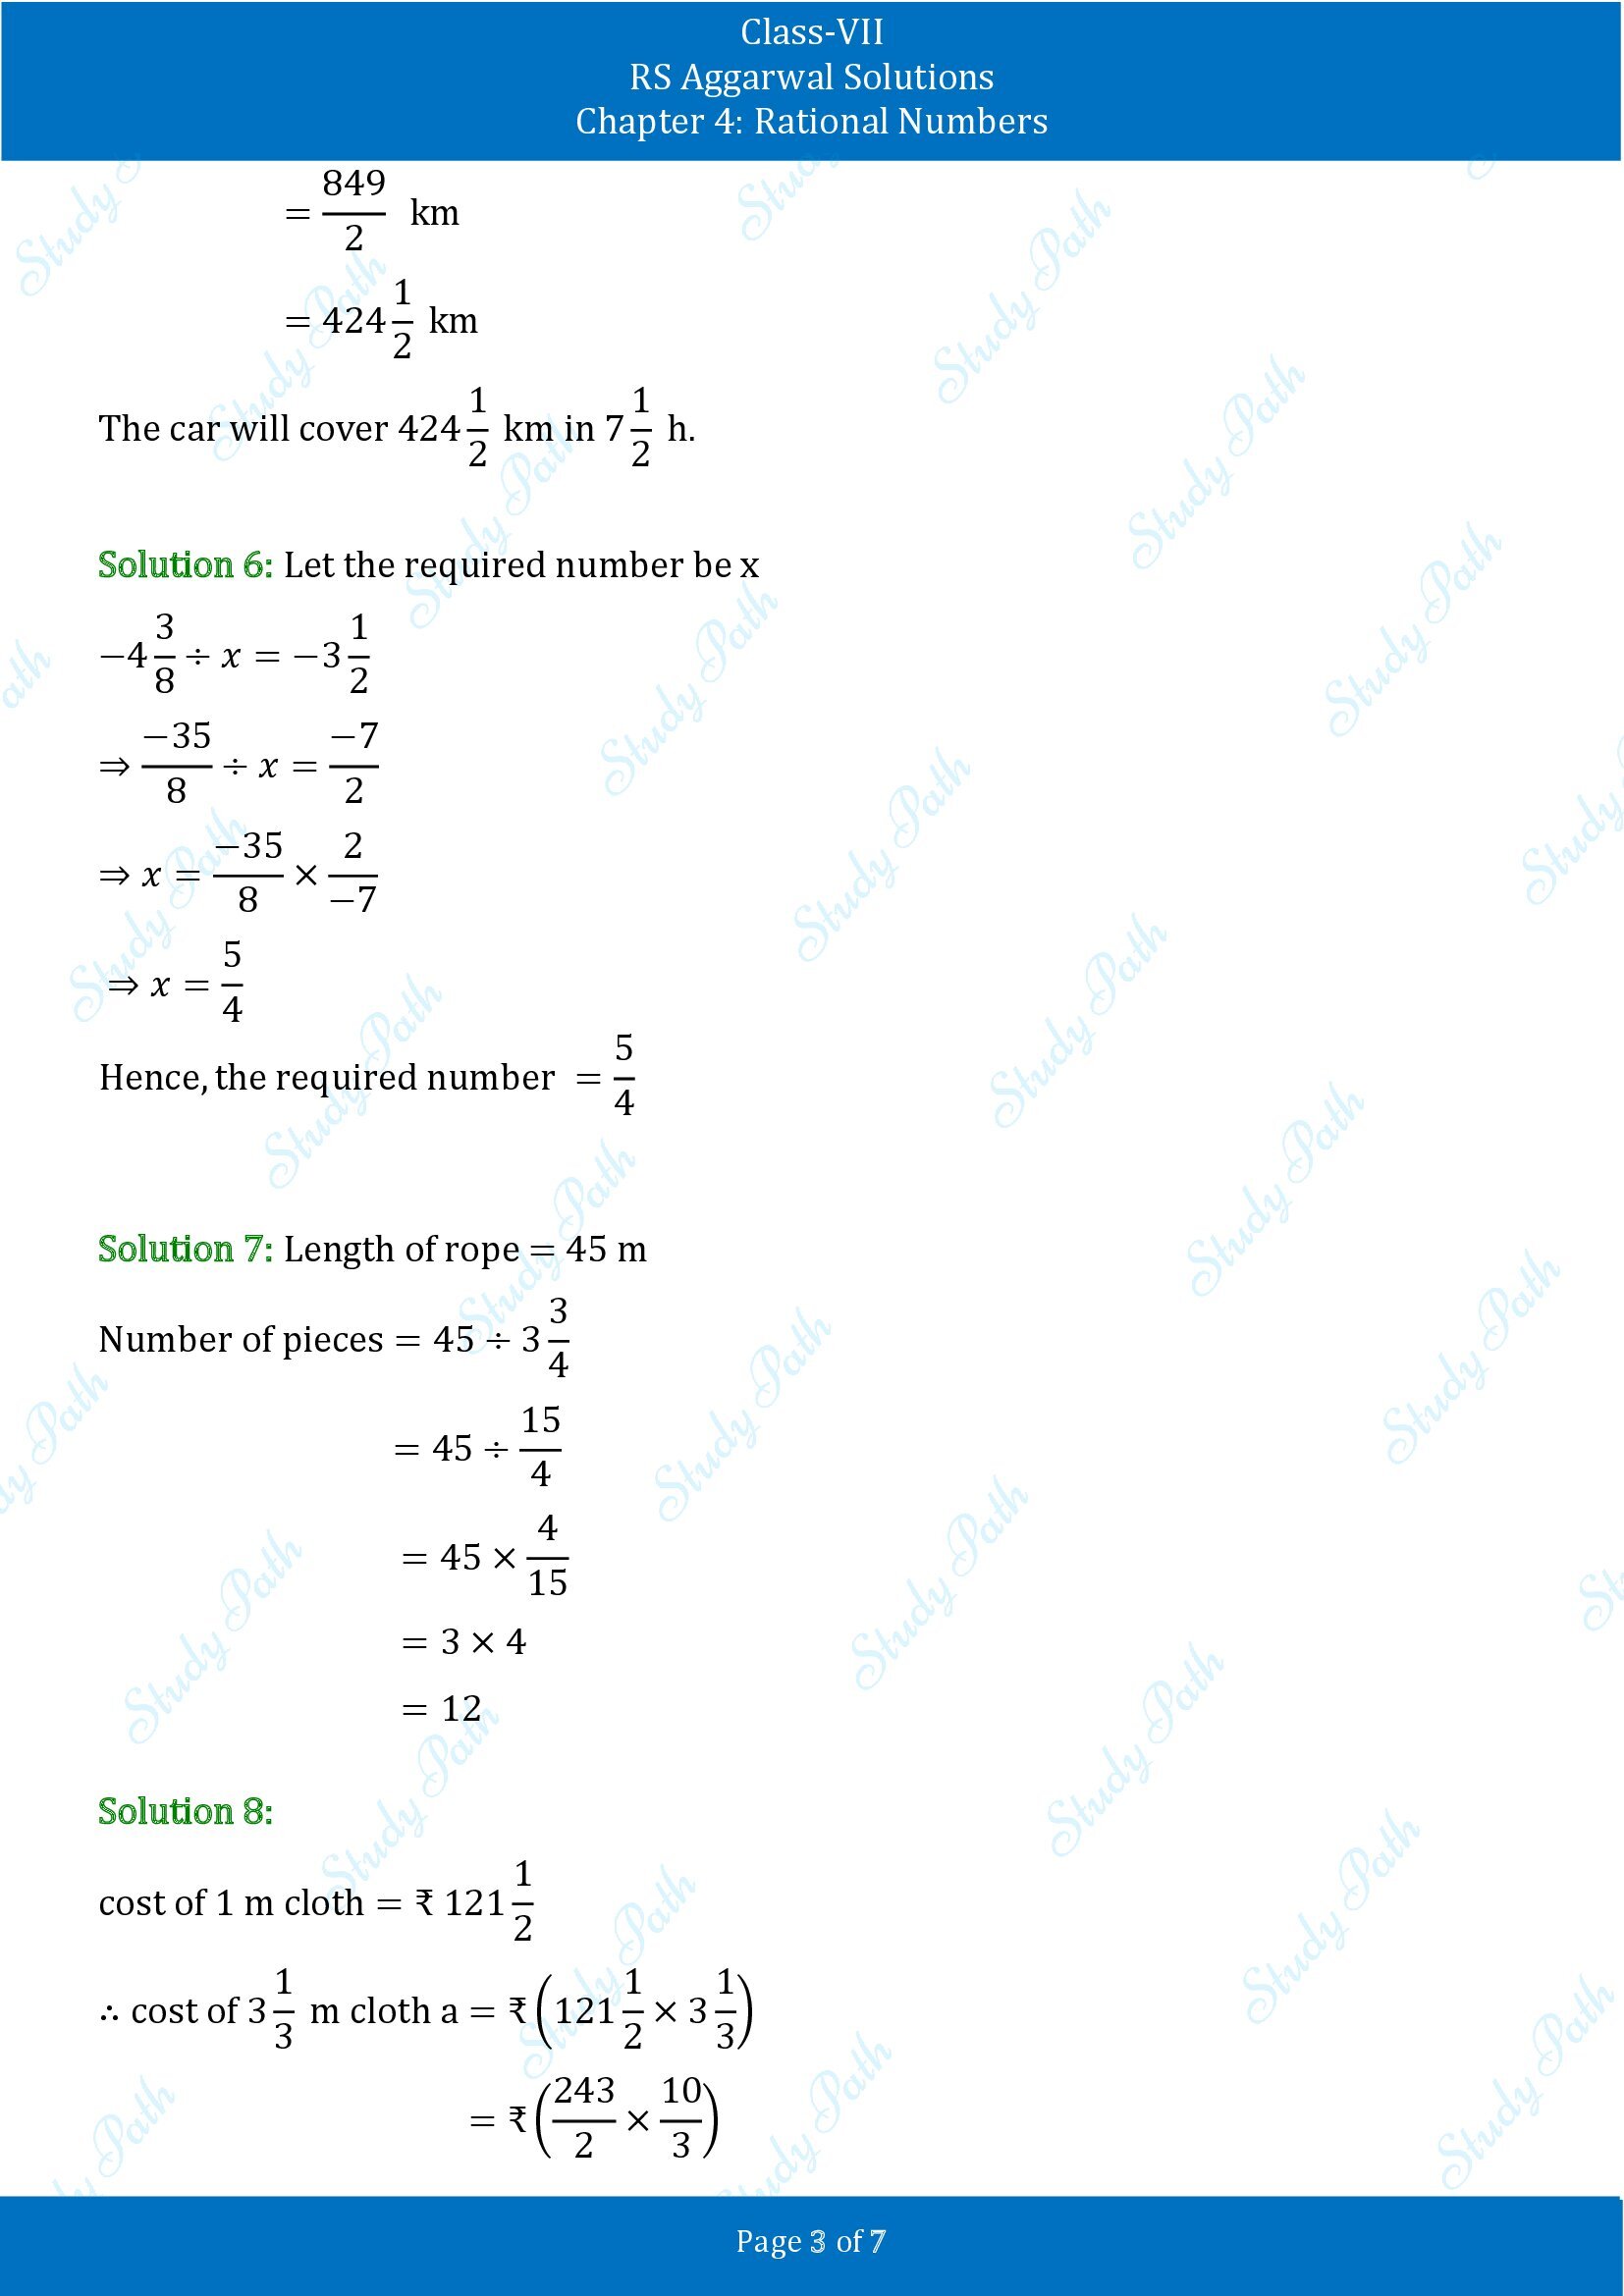 RS Aggarwal Solutions Class 7 Chapter 4 Rational Numbers Test Paper 00003